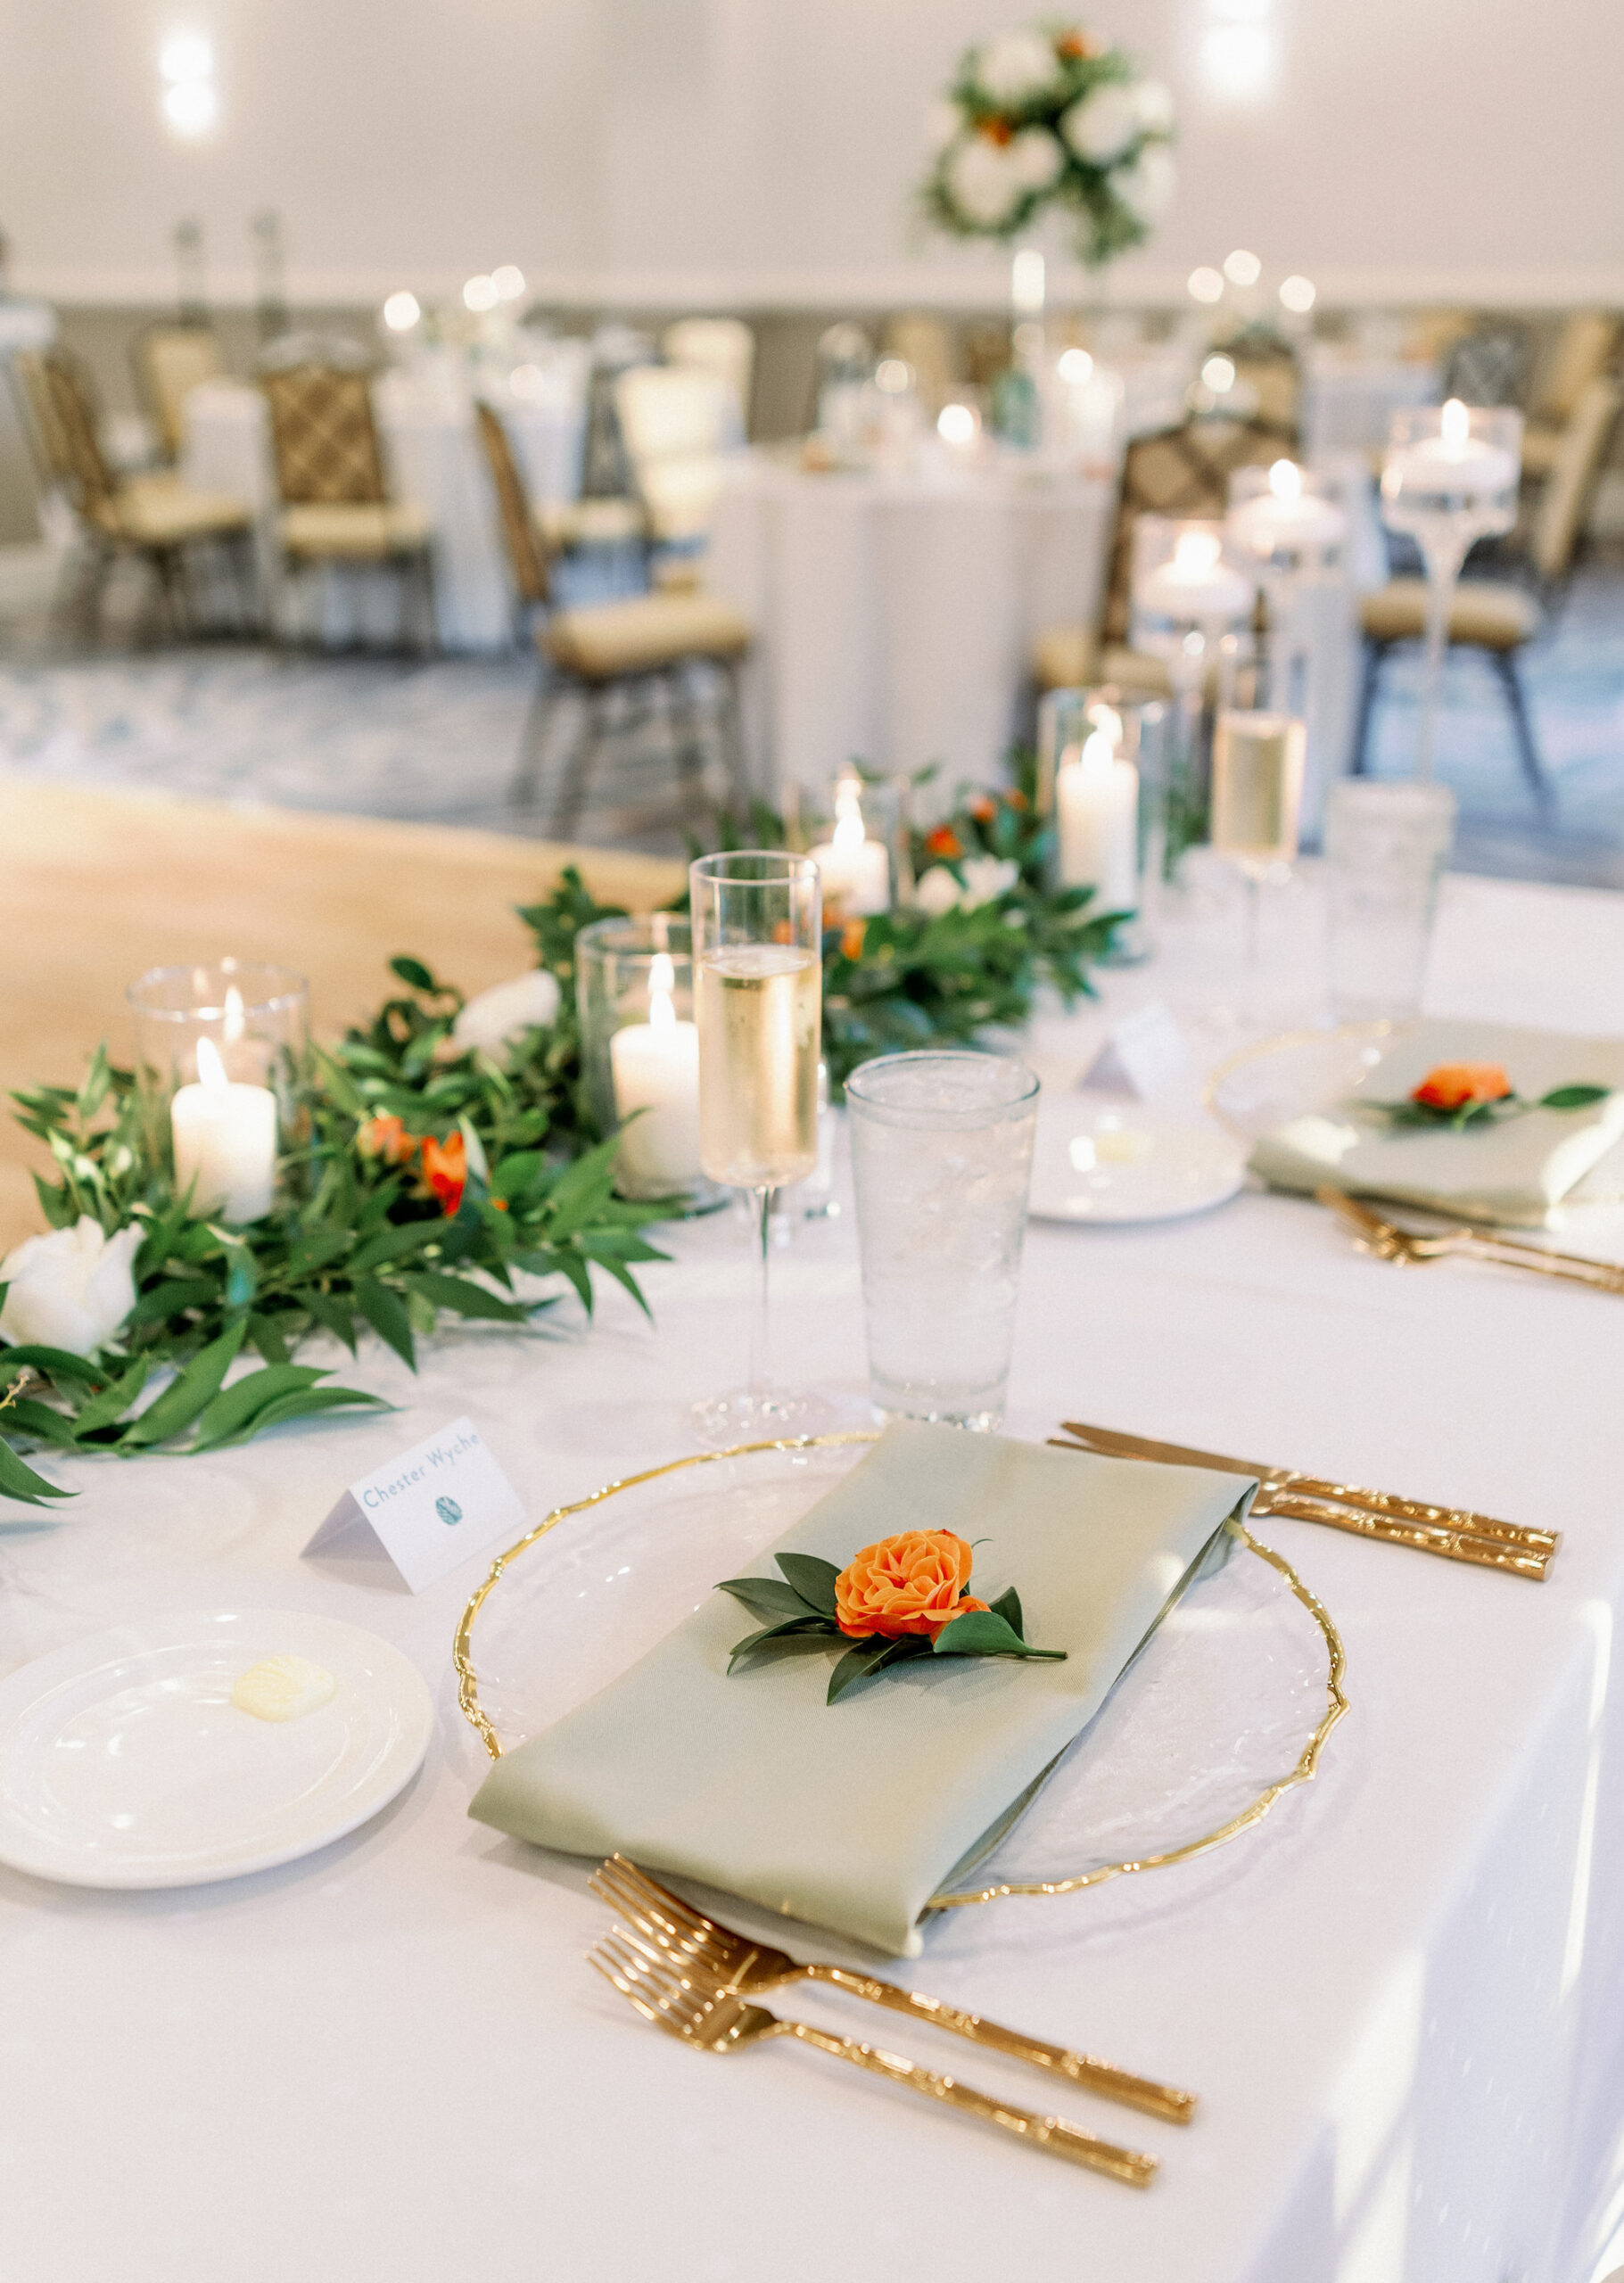 White Linen Tablescape with Greenery, Orange Floral Details and White Candles in Glass Jars and Gold Flatware | Tampa Wedding Rentals Kate Ryan Event Rentals